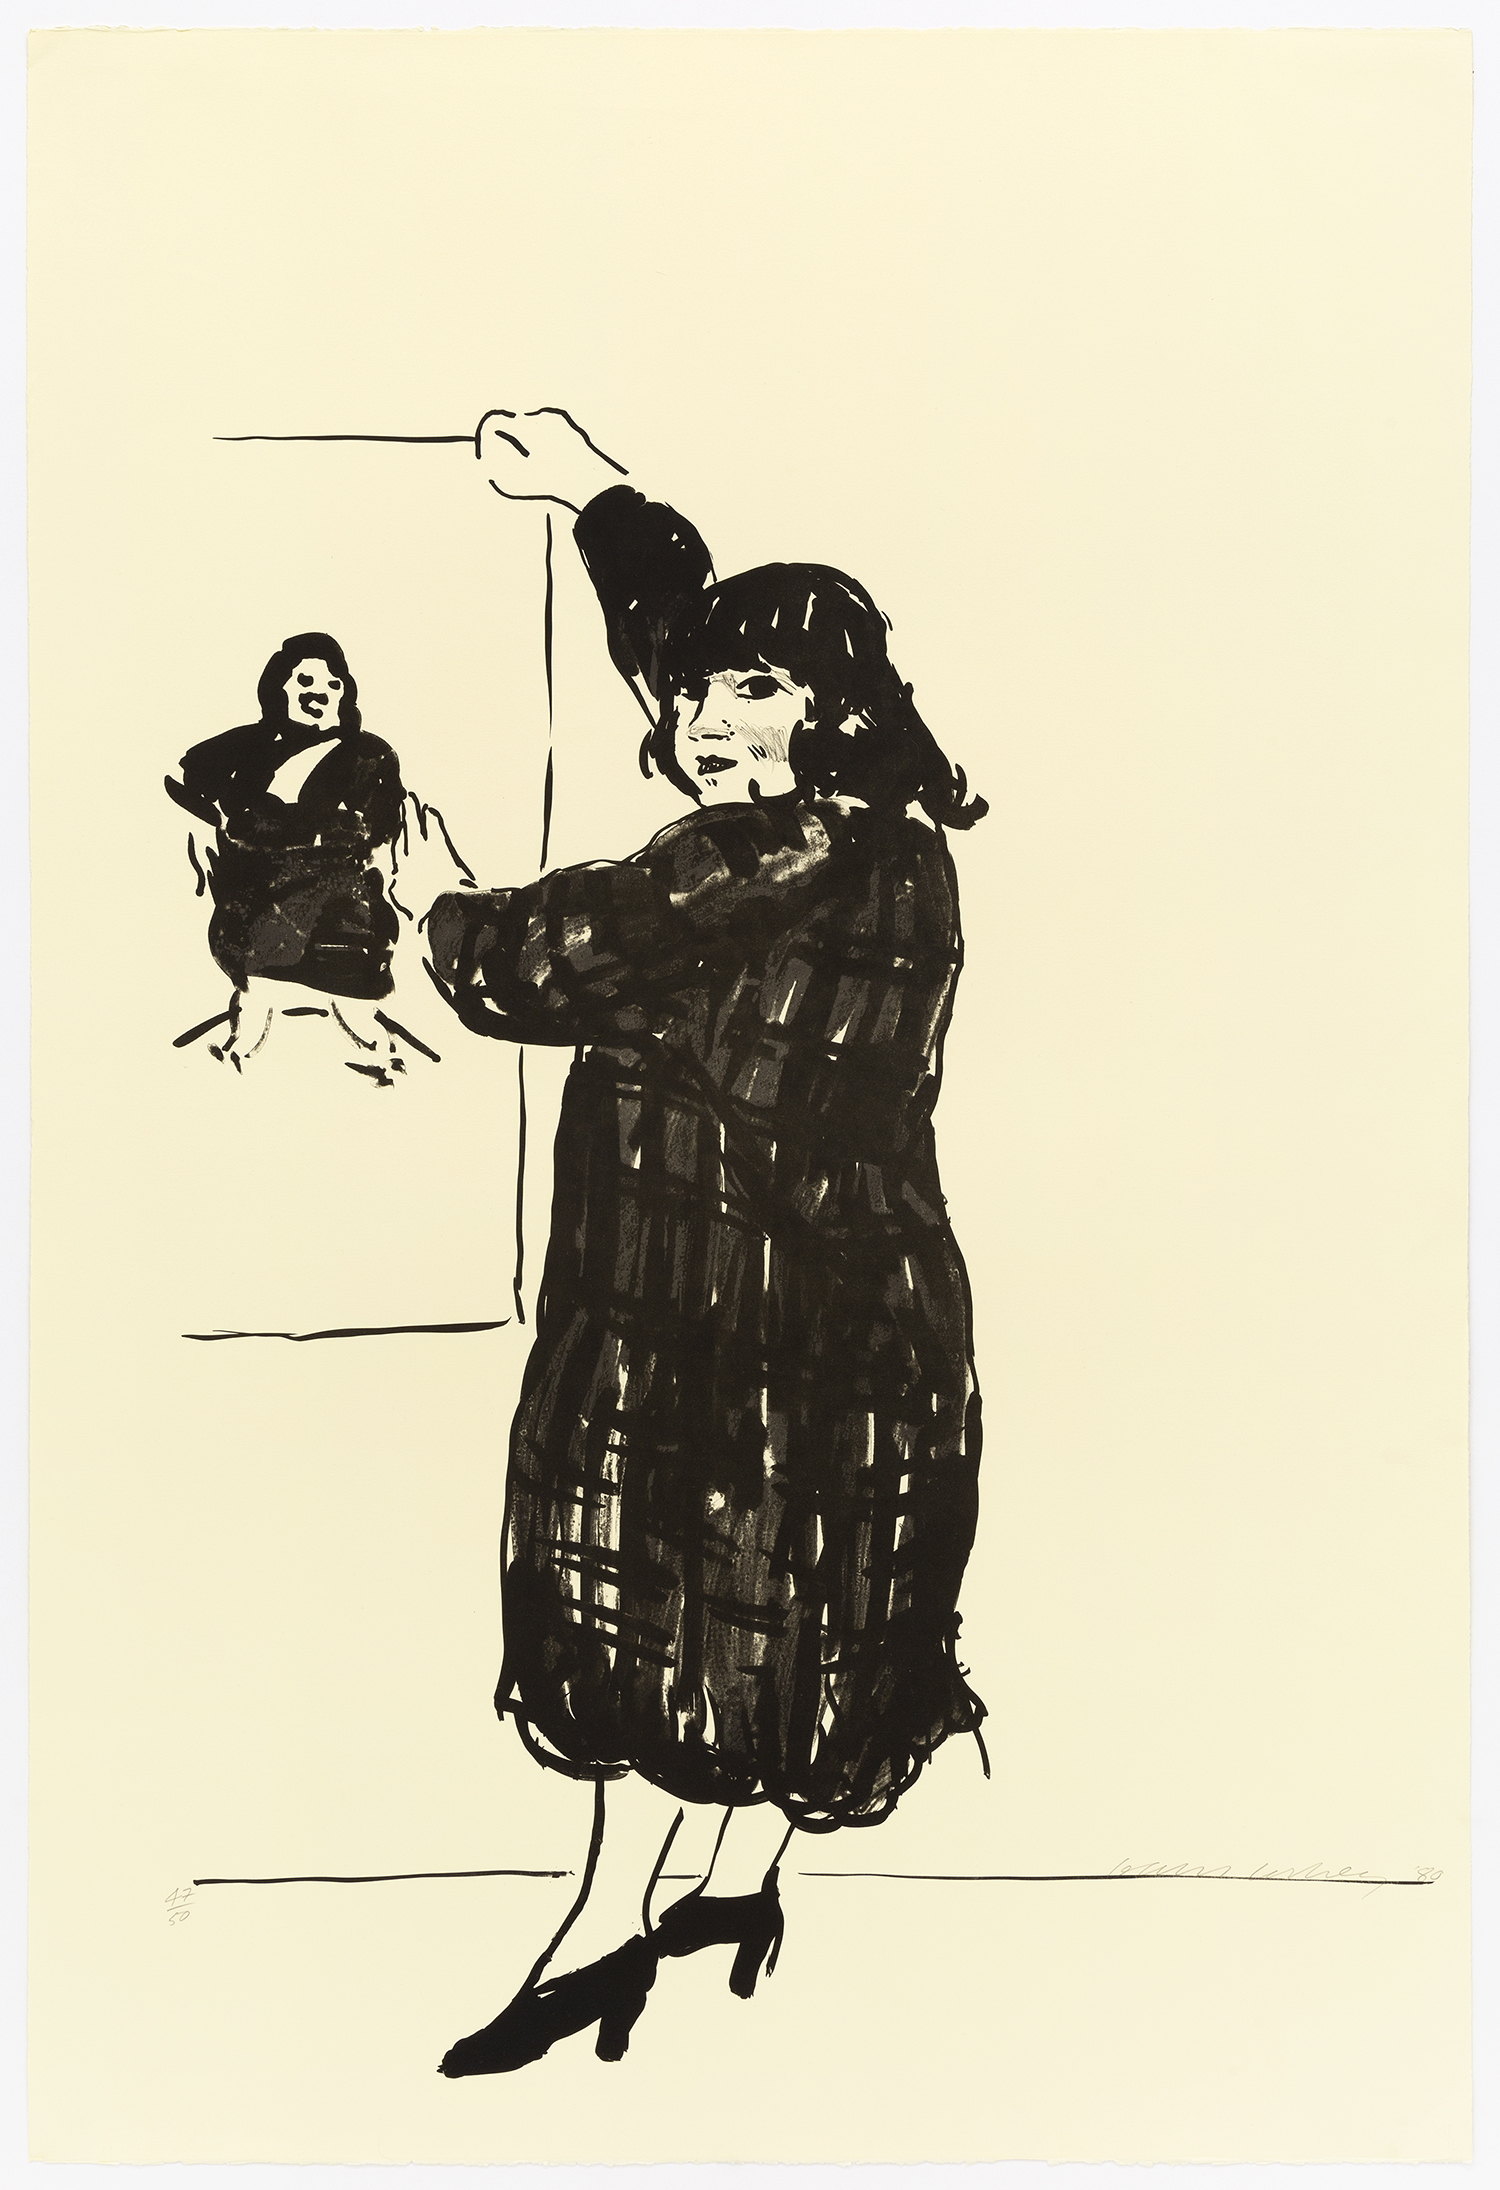 Ann Looking At Her Picture, 1980, Lithograph, 44 x 30 inches (111.8 x 76.2 cm), Edition of 50